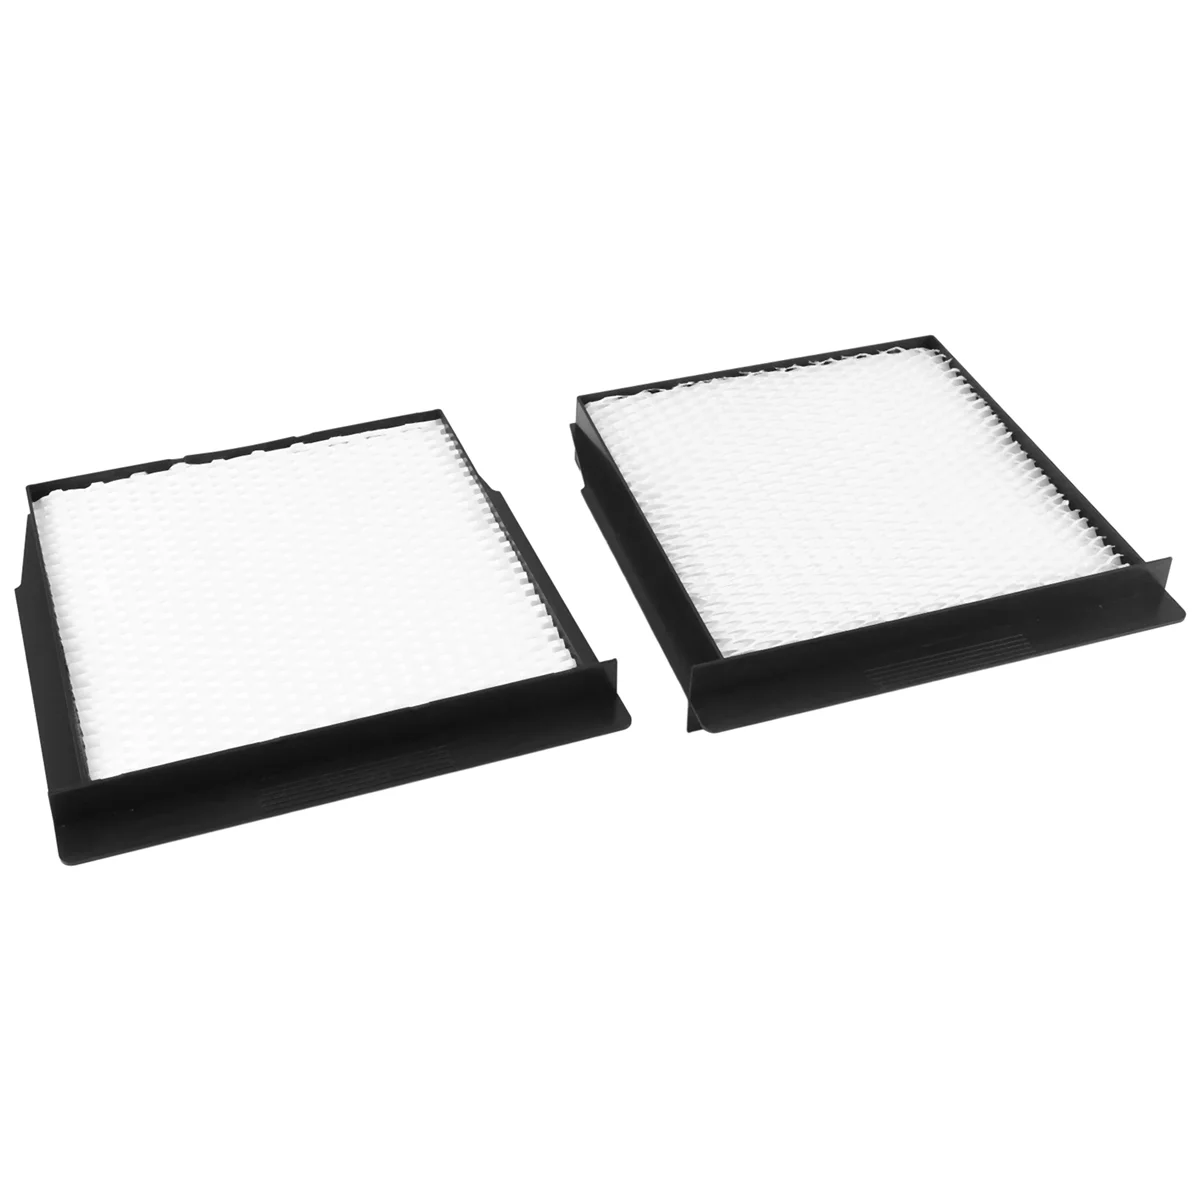 Filter Fit For Essick Air 1040 / 1040 High Efficiency Filter